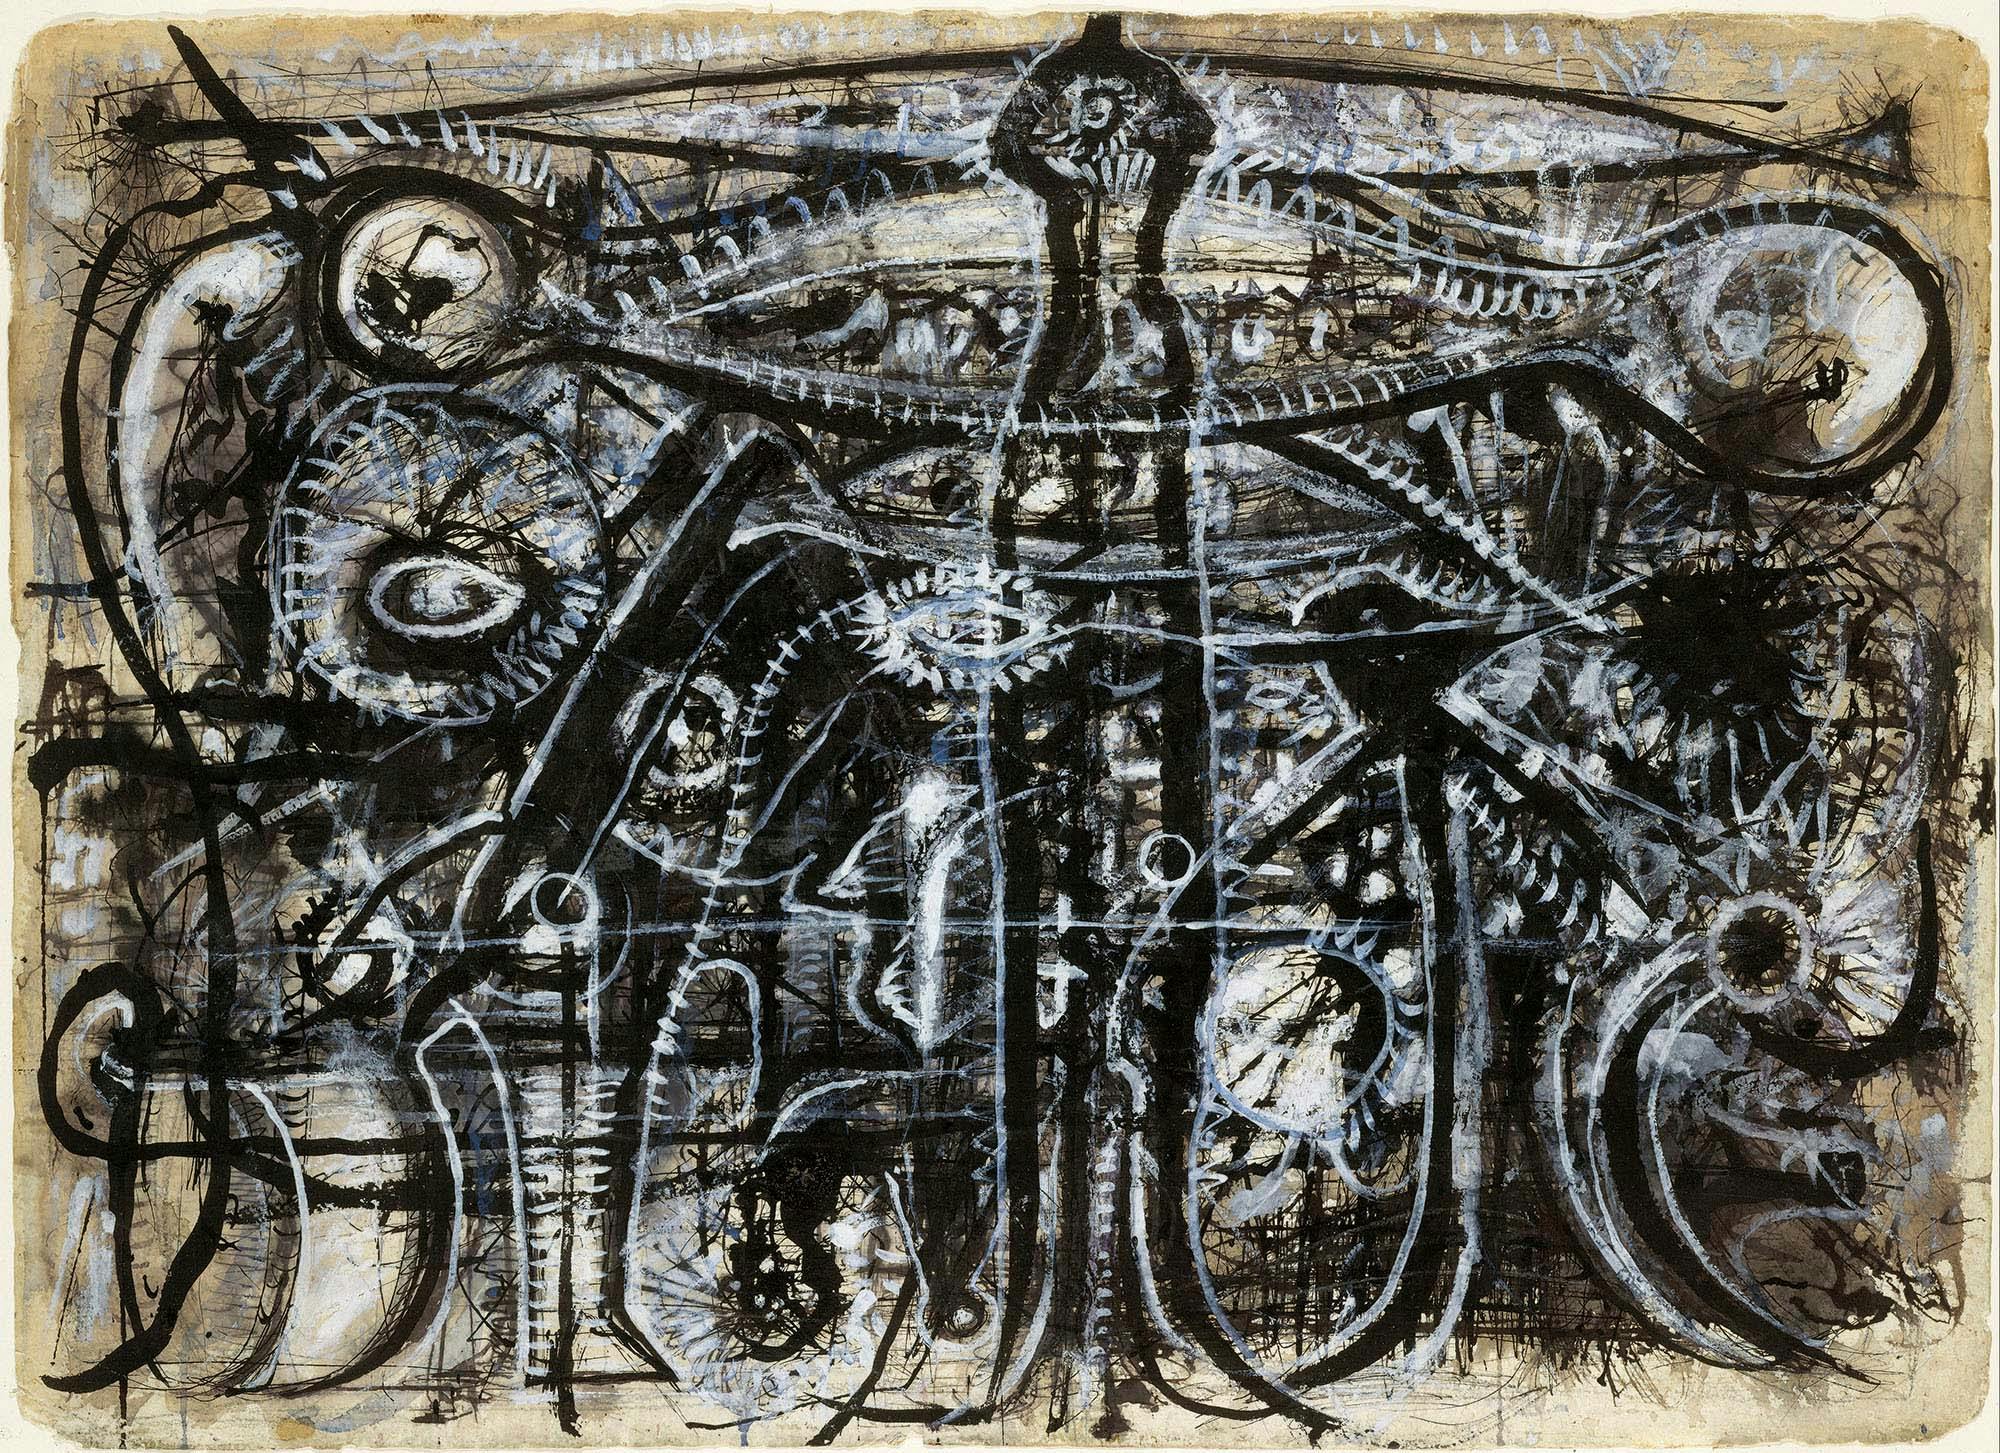 Undulation Series
c. 1941–44
Gouache watercolor, and ink on paper
22 1/2 x 32 1/4 in. (57.2 x 81.9 cm)
The Metropolitan Museum of Art, New York, Anonymous Gift (1991.476.1)
 – The Richard Pousette-Dart Foundation